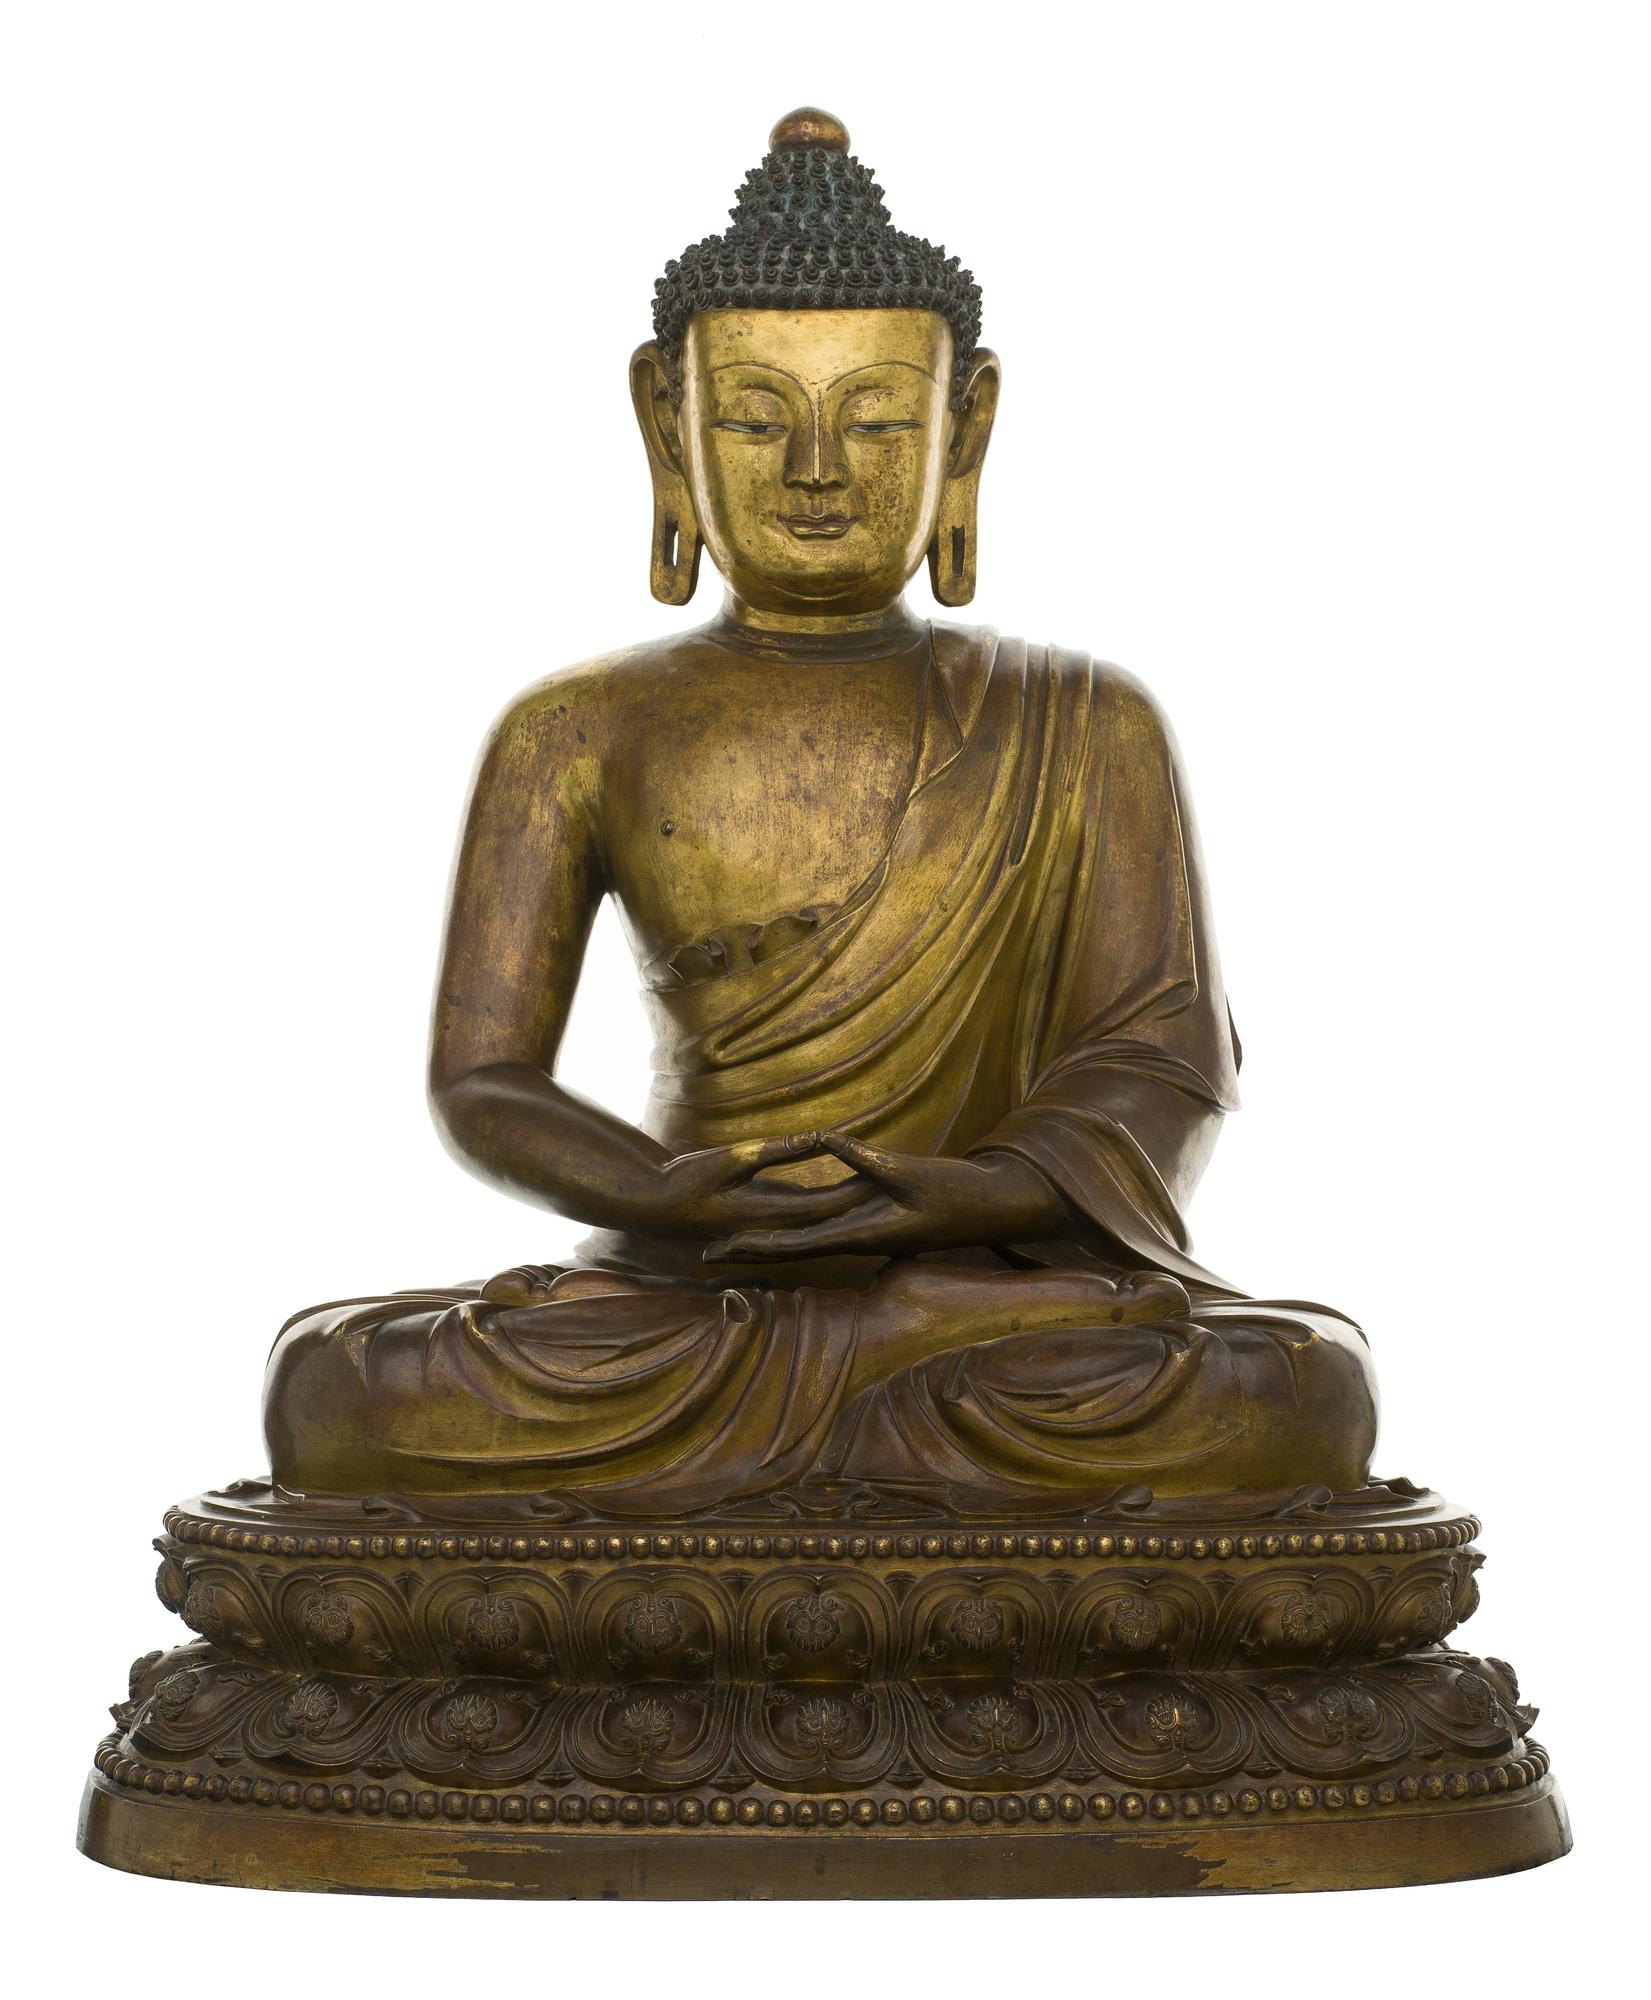 Figure of Buddha in gilt bronze, seated on double lotus base in a meditation gesture: China, Qing Dynasty, 19th century AD.